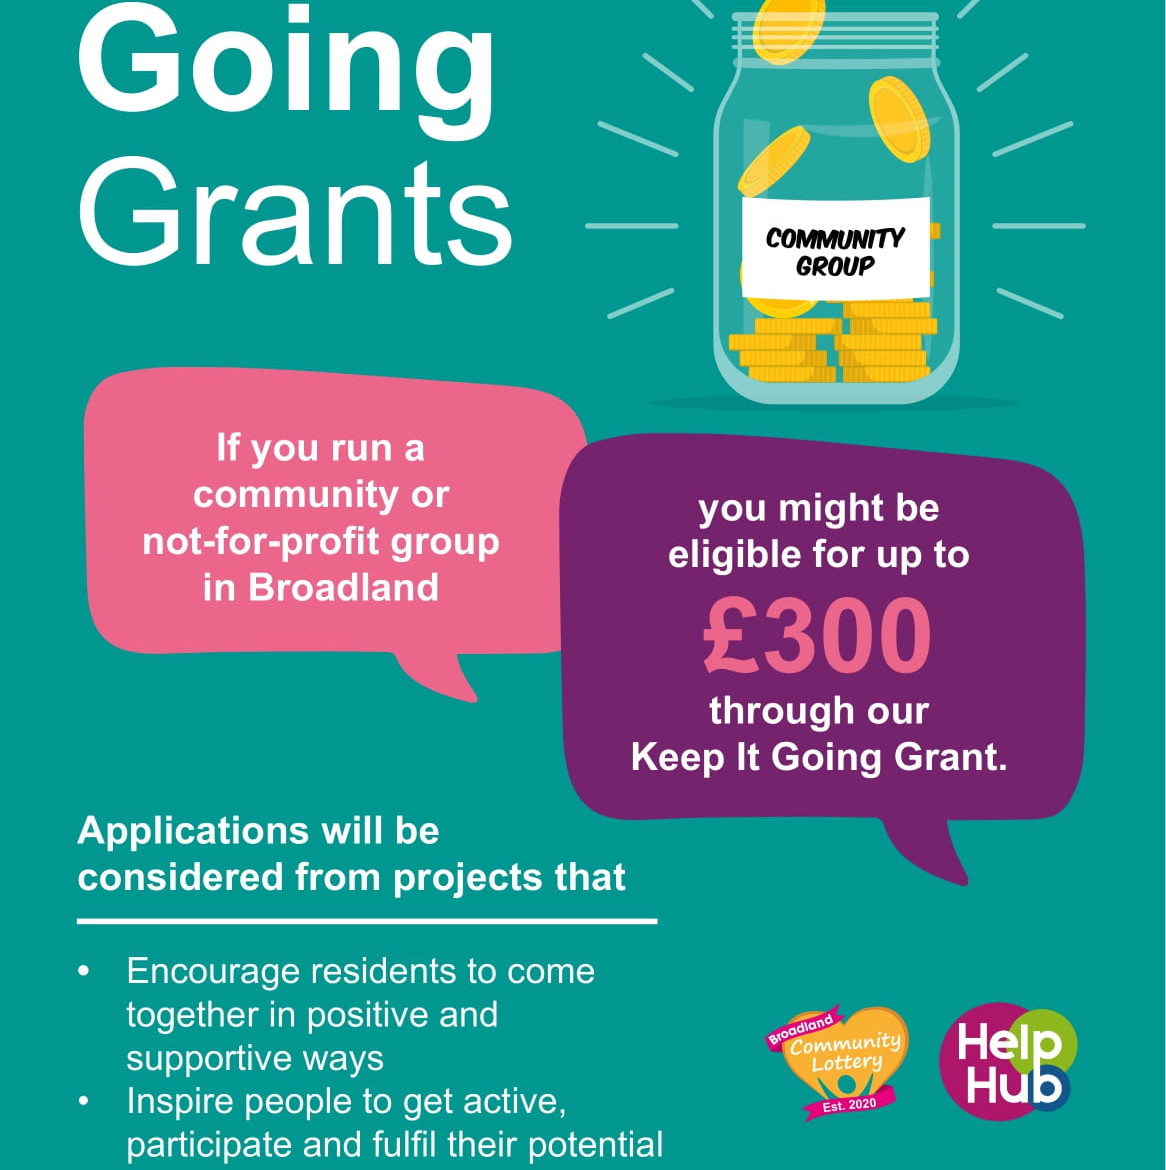 Apply for a Keep it Going Grant